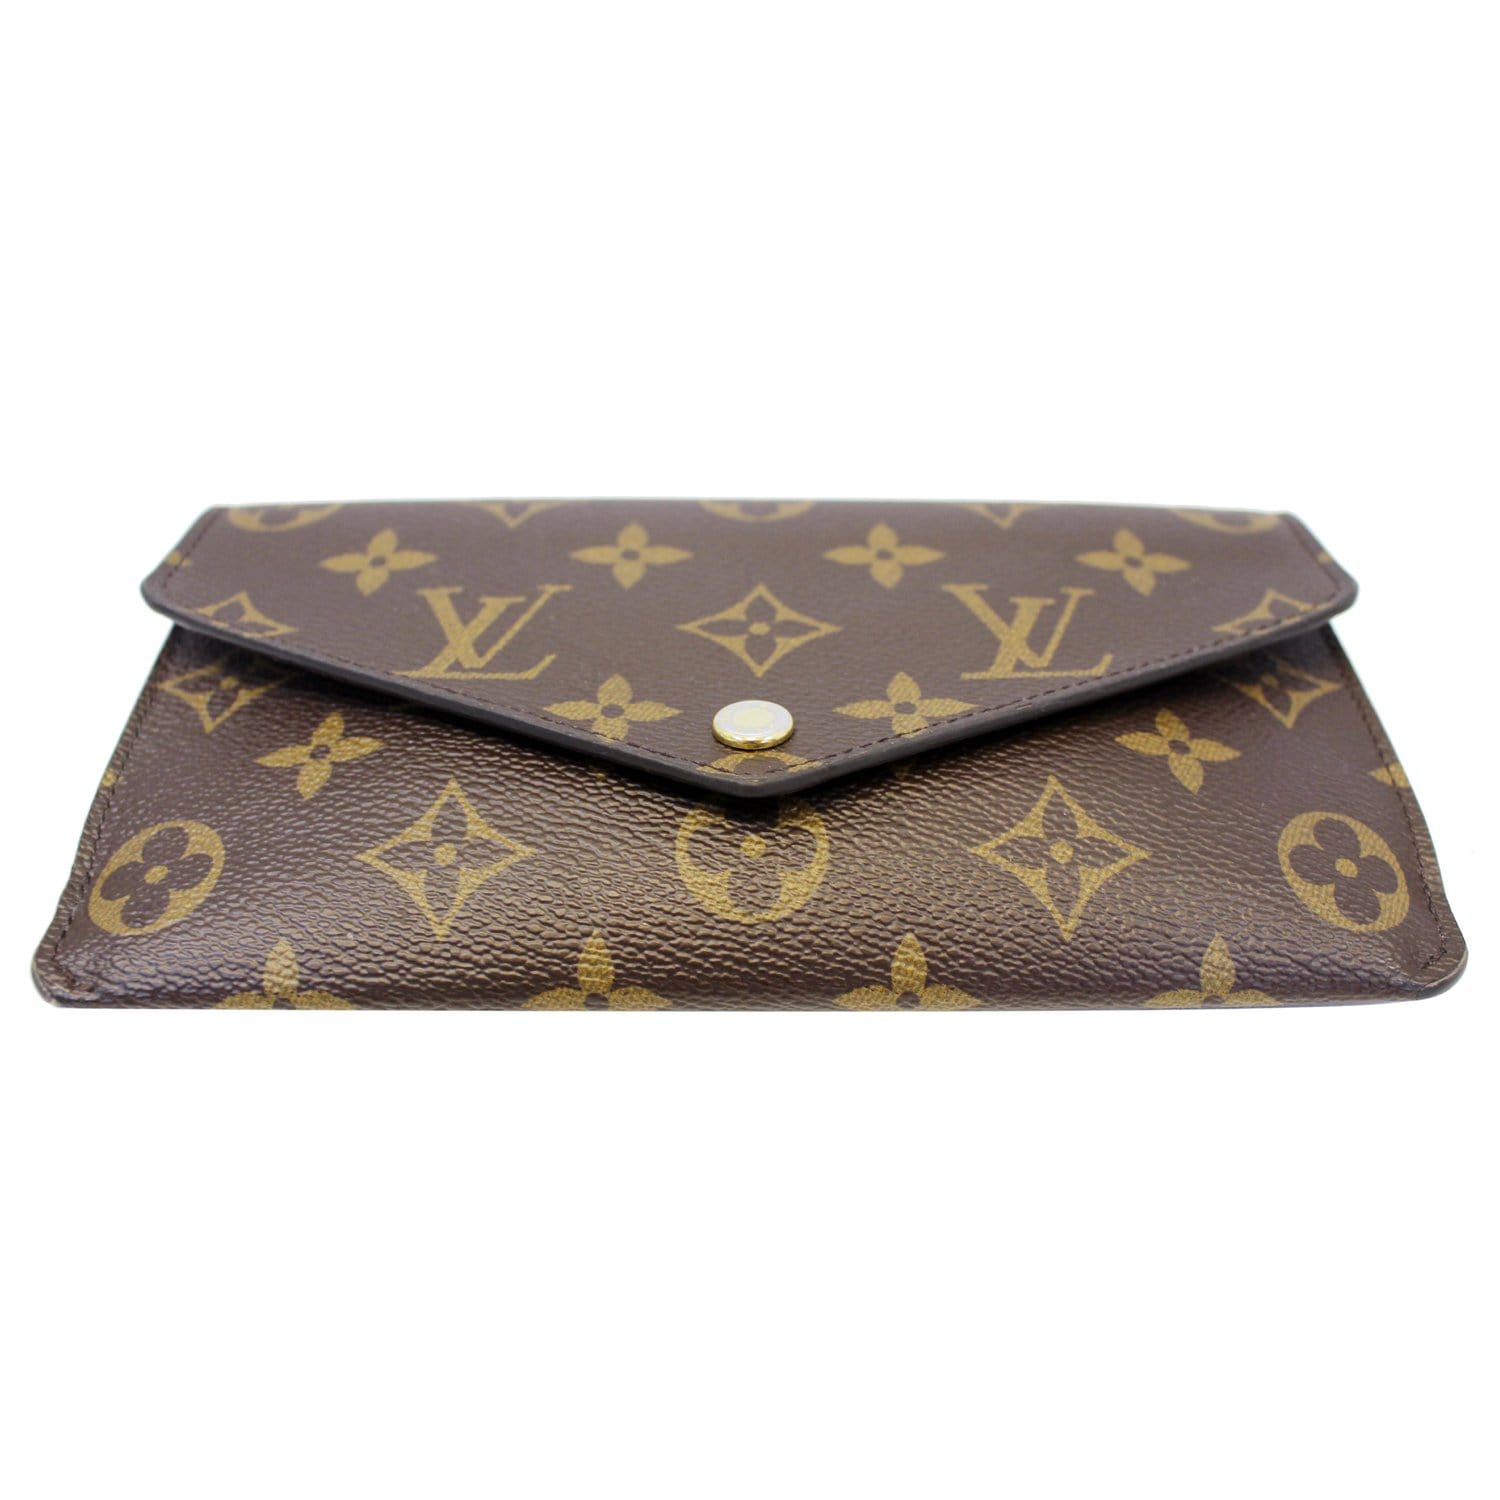 Louis Vuitton Jeanne Wallet – First Impressions and Review